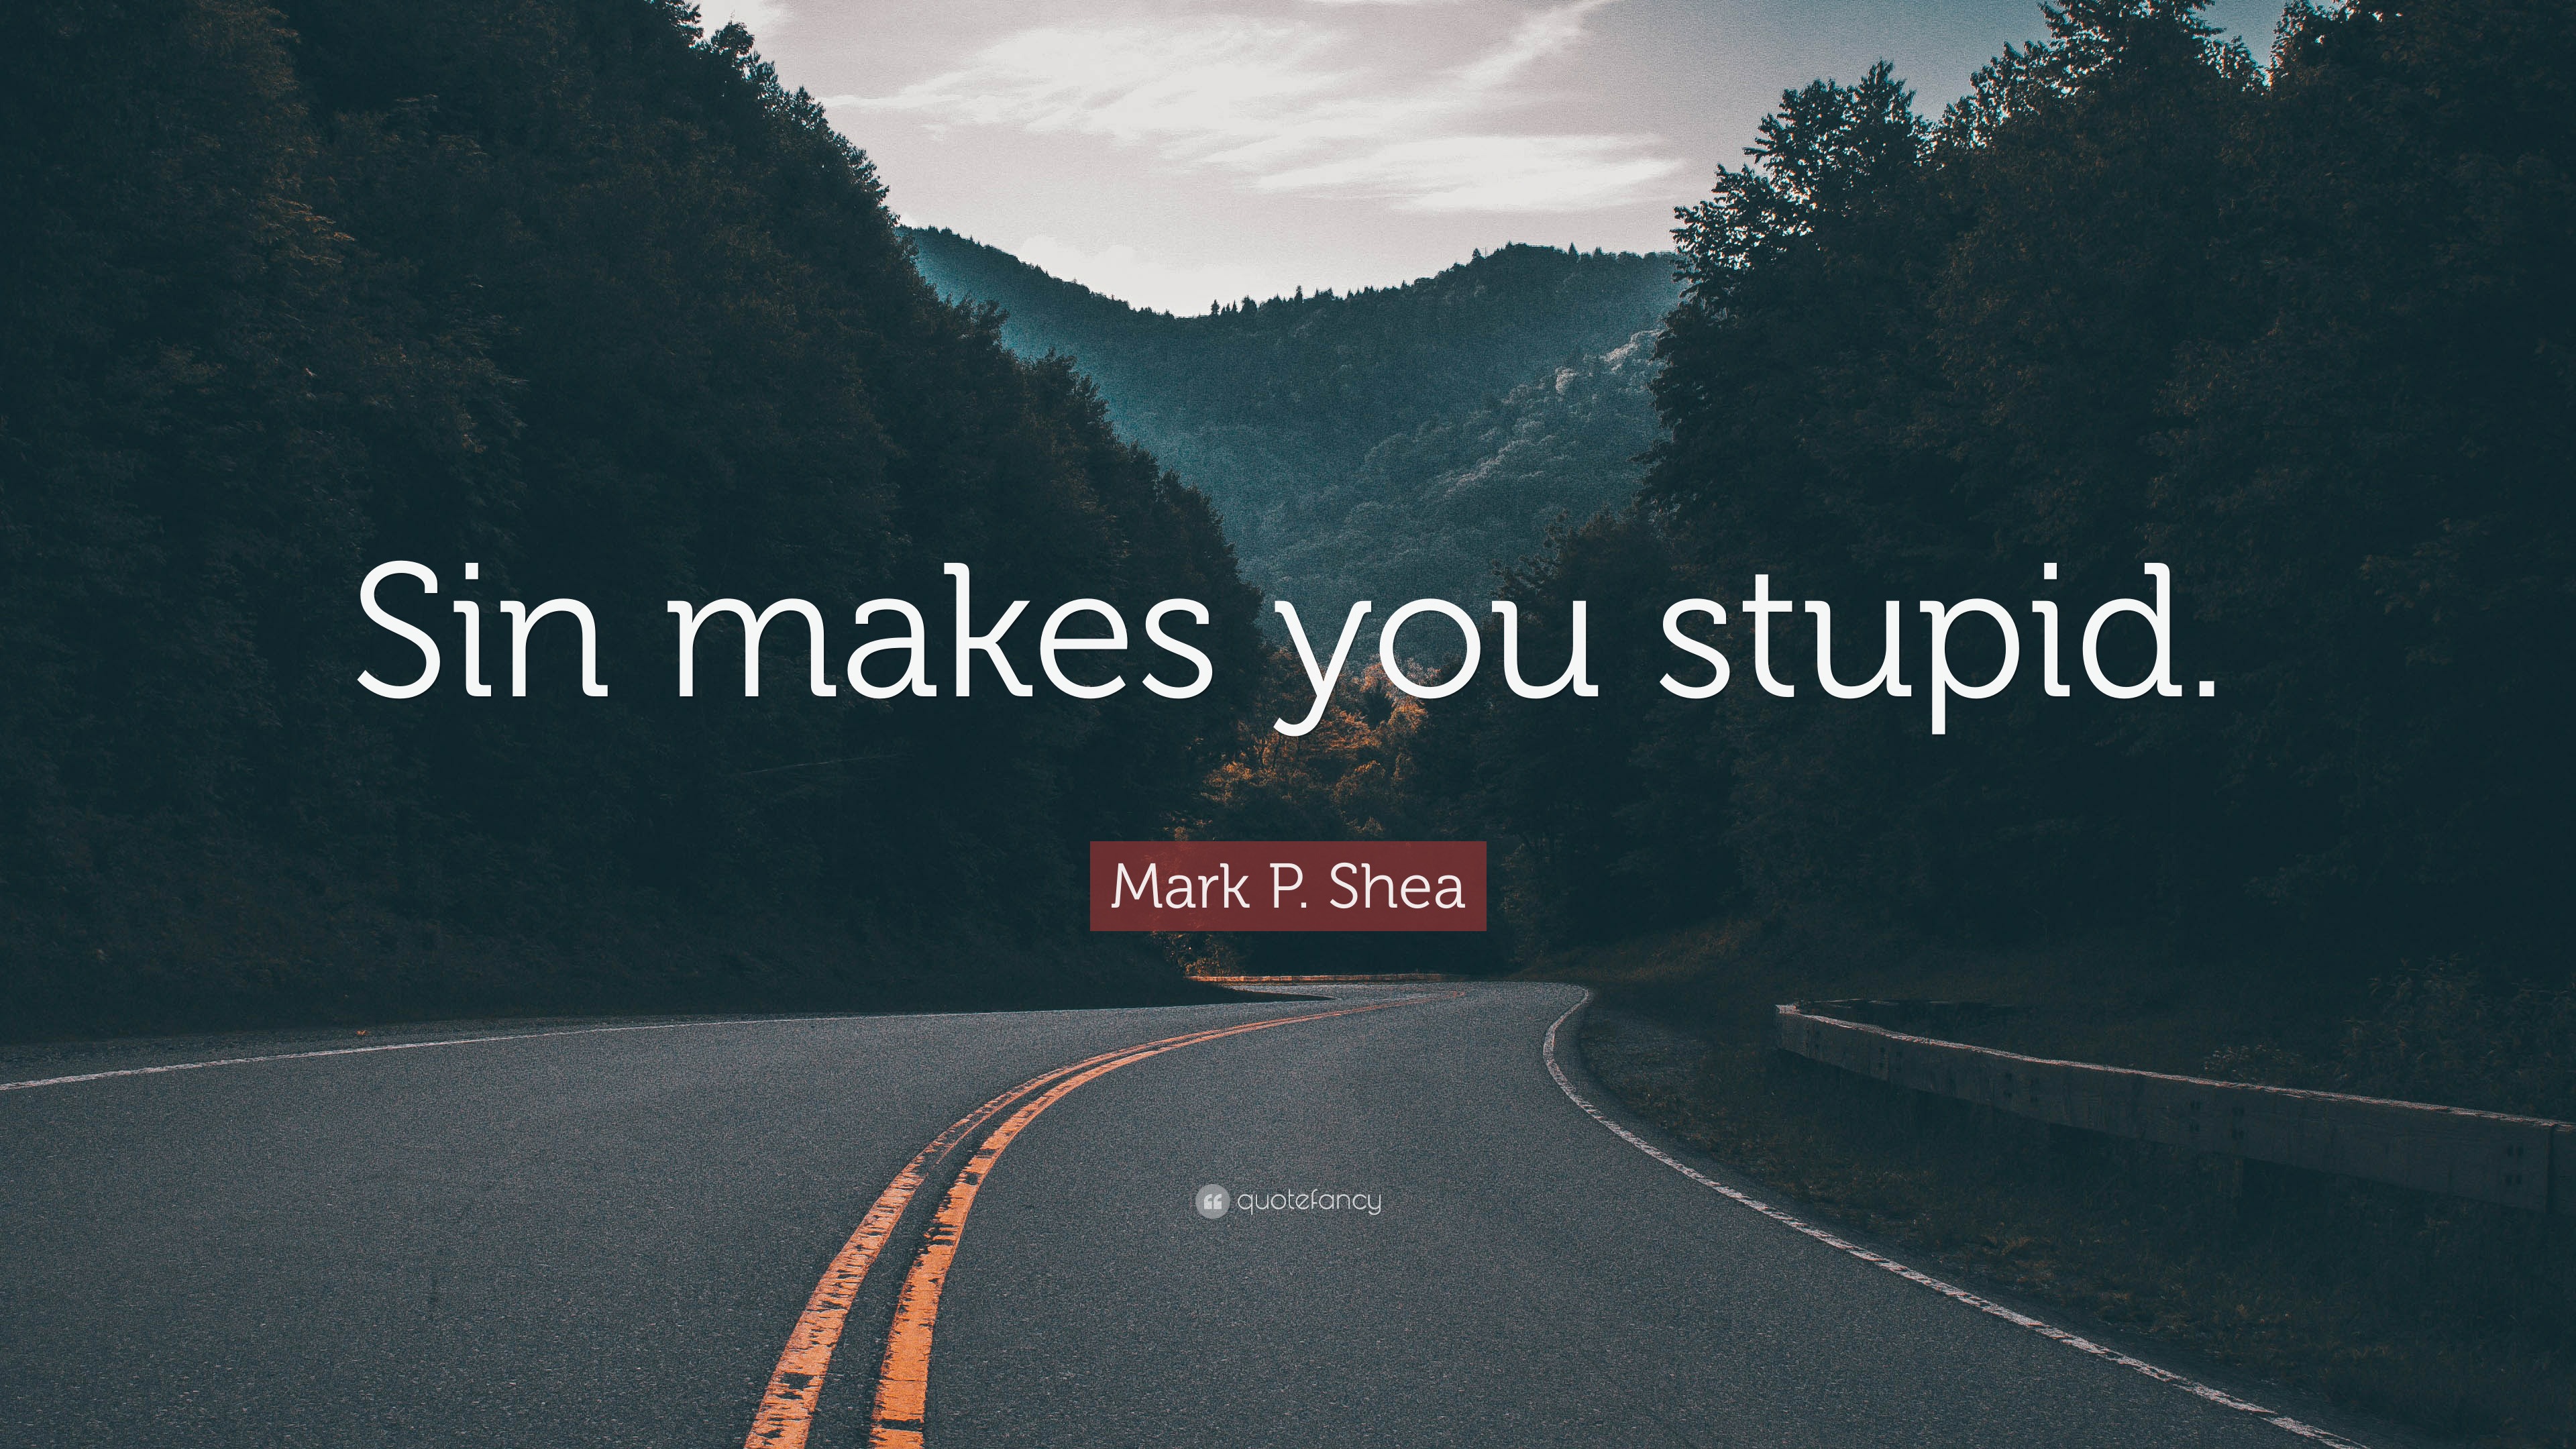 Mark P. Shea Quote: “Sin makes you stupid.”